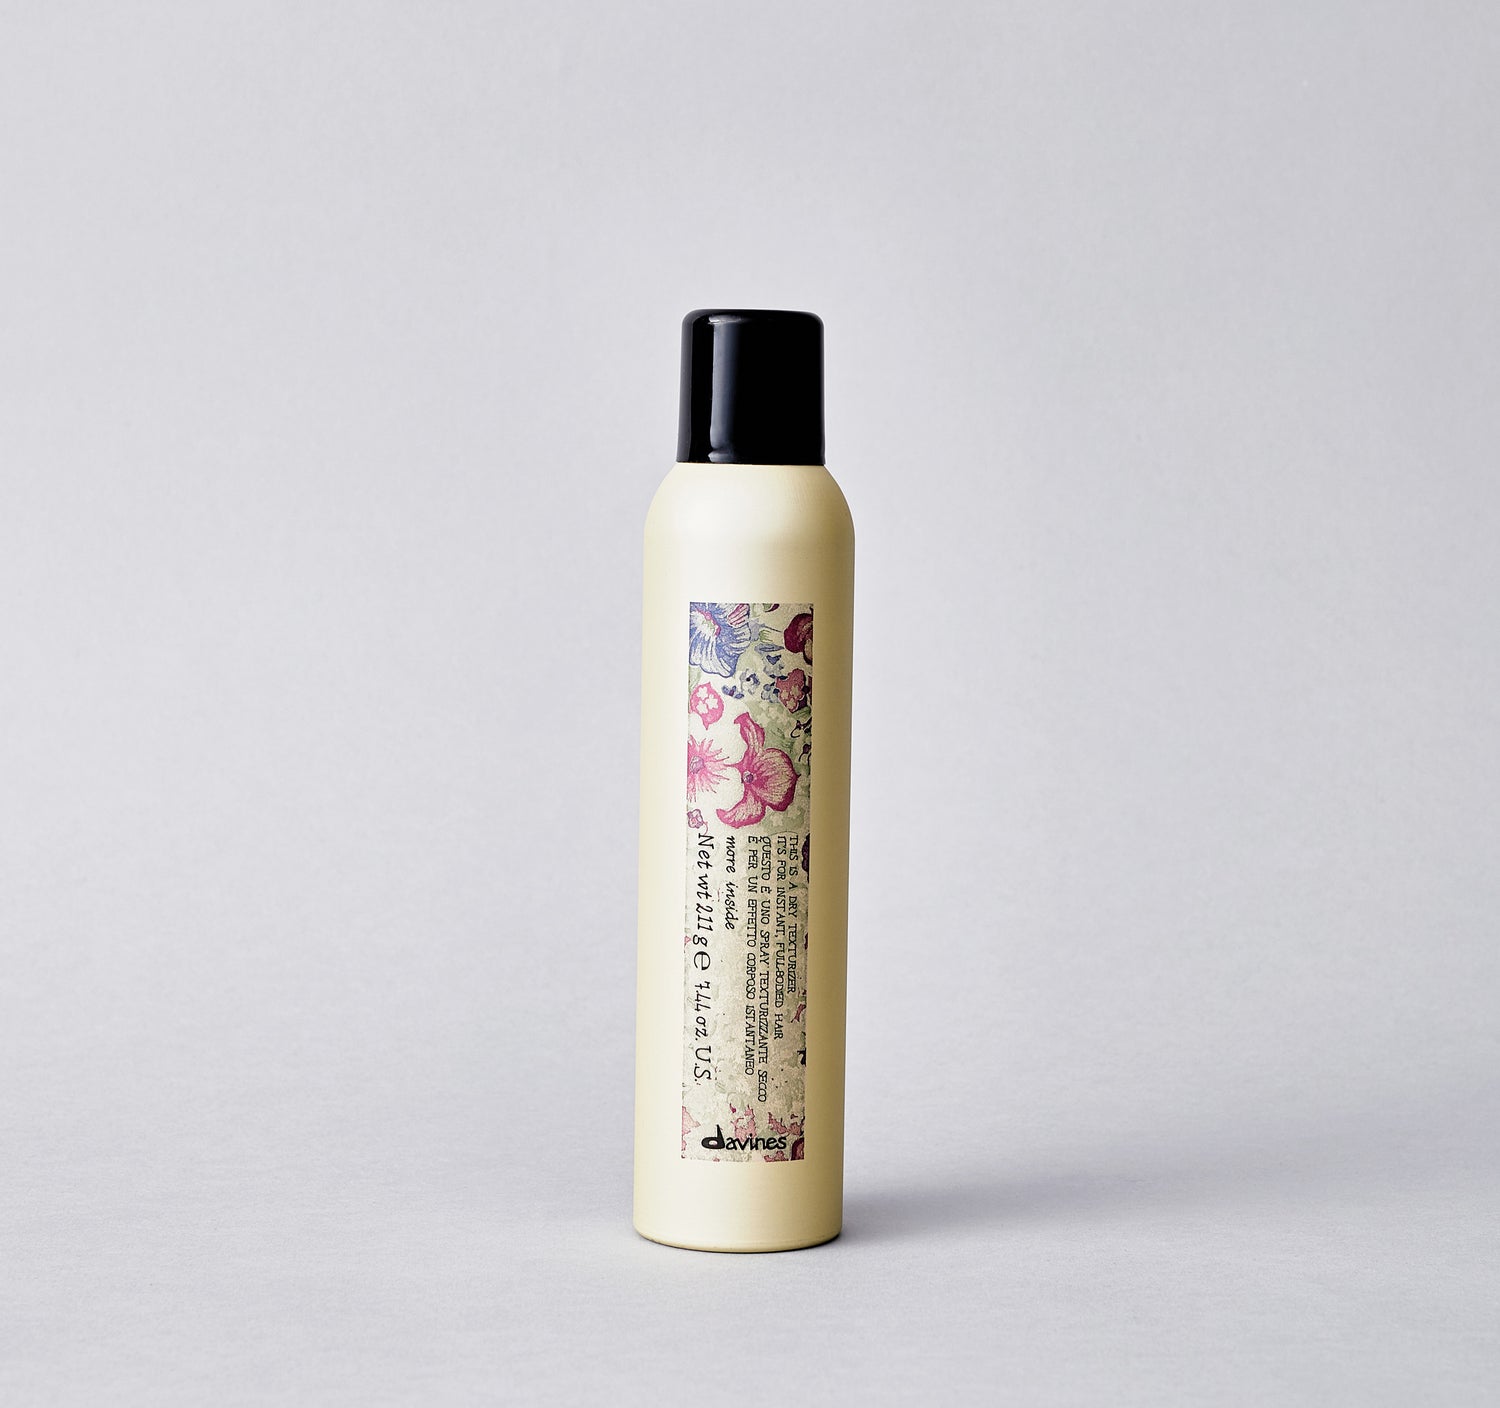 The Davines Dry Texturizer is especially designed for piecey, defined texture and hold. It gives the hair an instant full-bodied and tousled look without weighing it down.